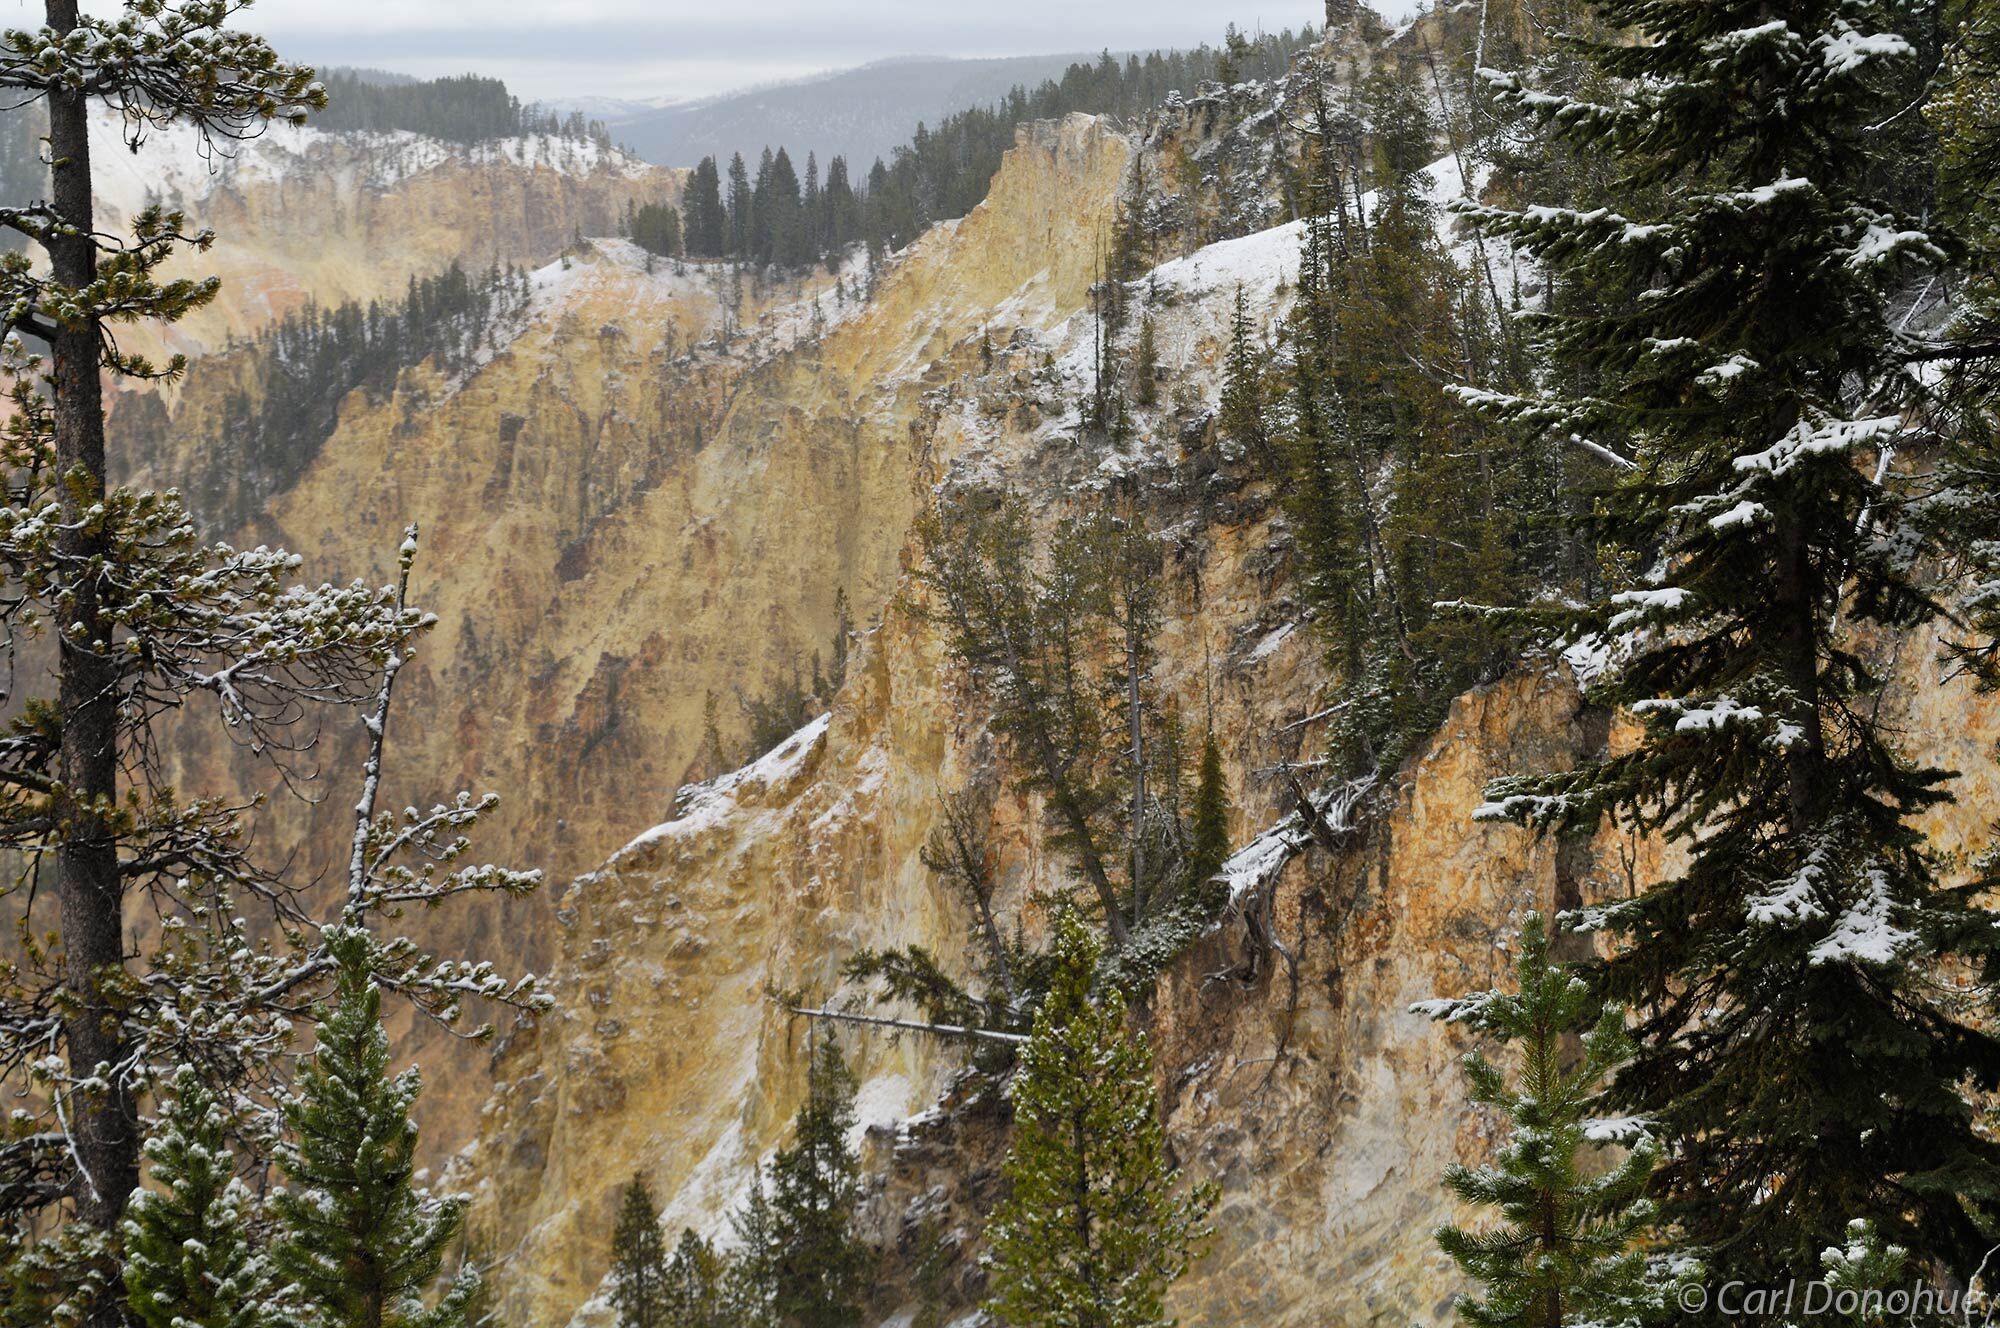 View of the Canyon below the Lower Falls in Wyoming's Yellowstone National Park, Wyoming.